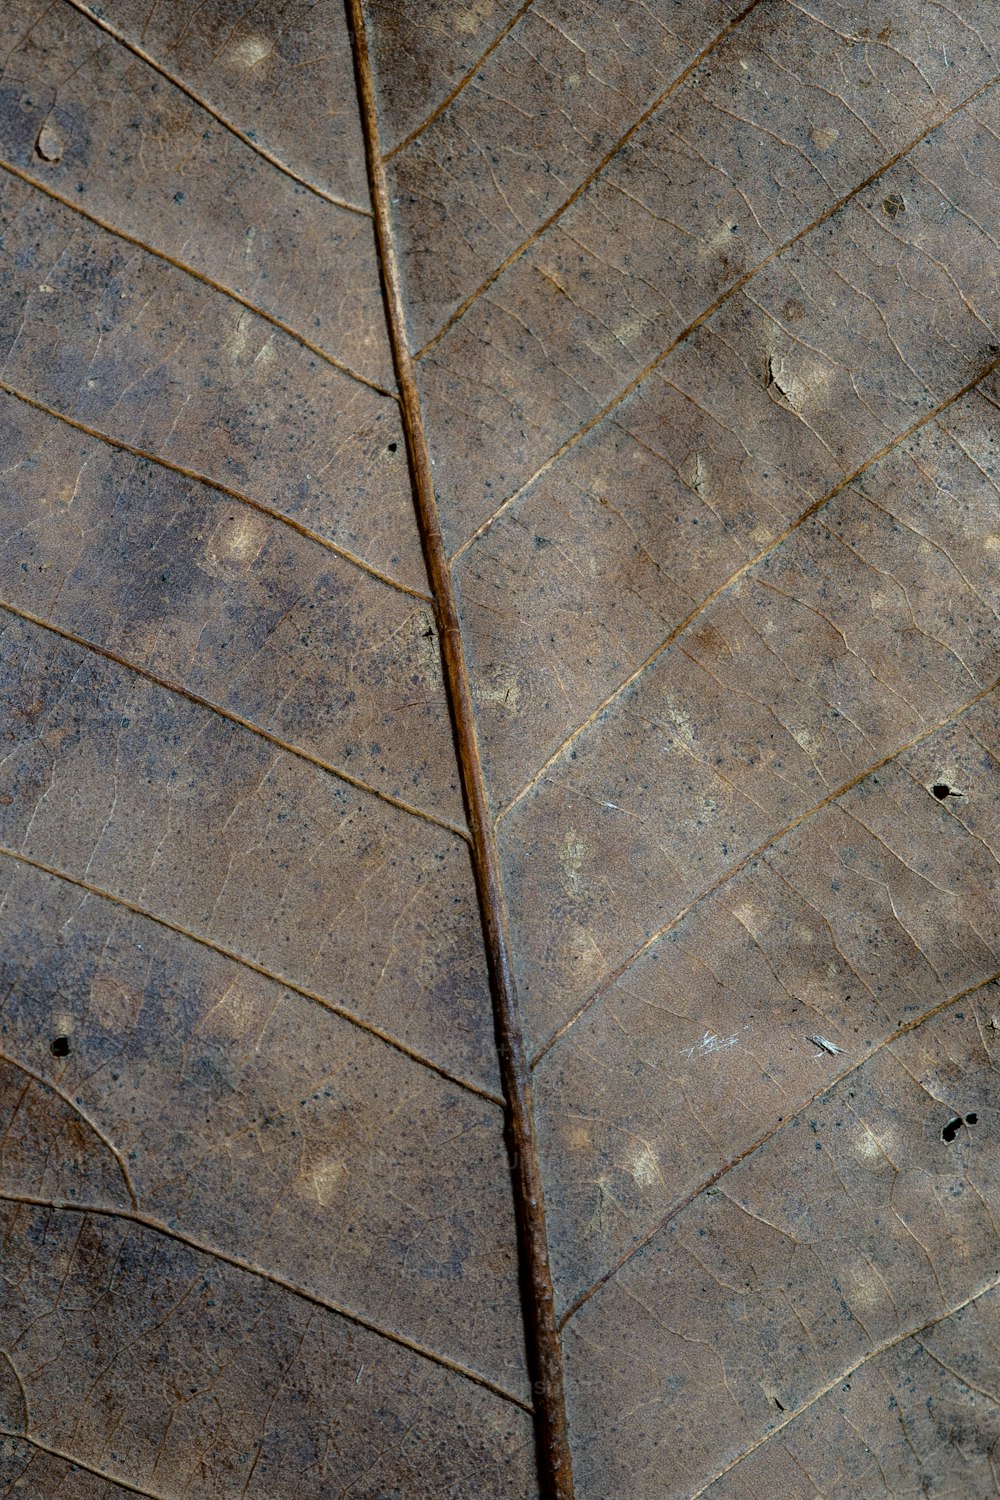 a close up of a brown leaf with little dots on it